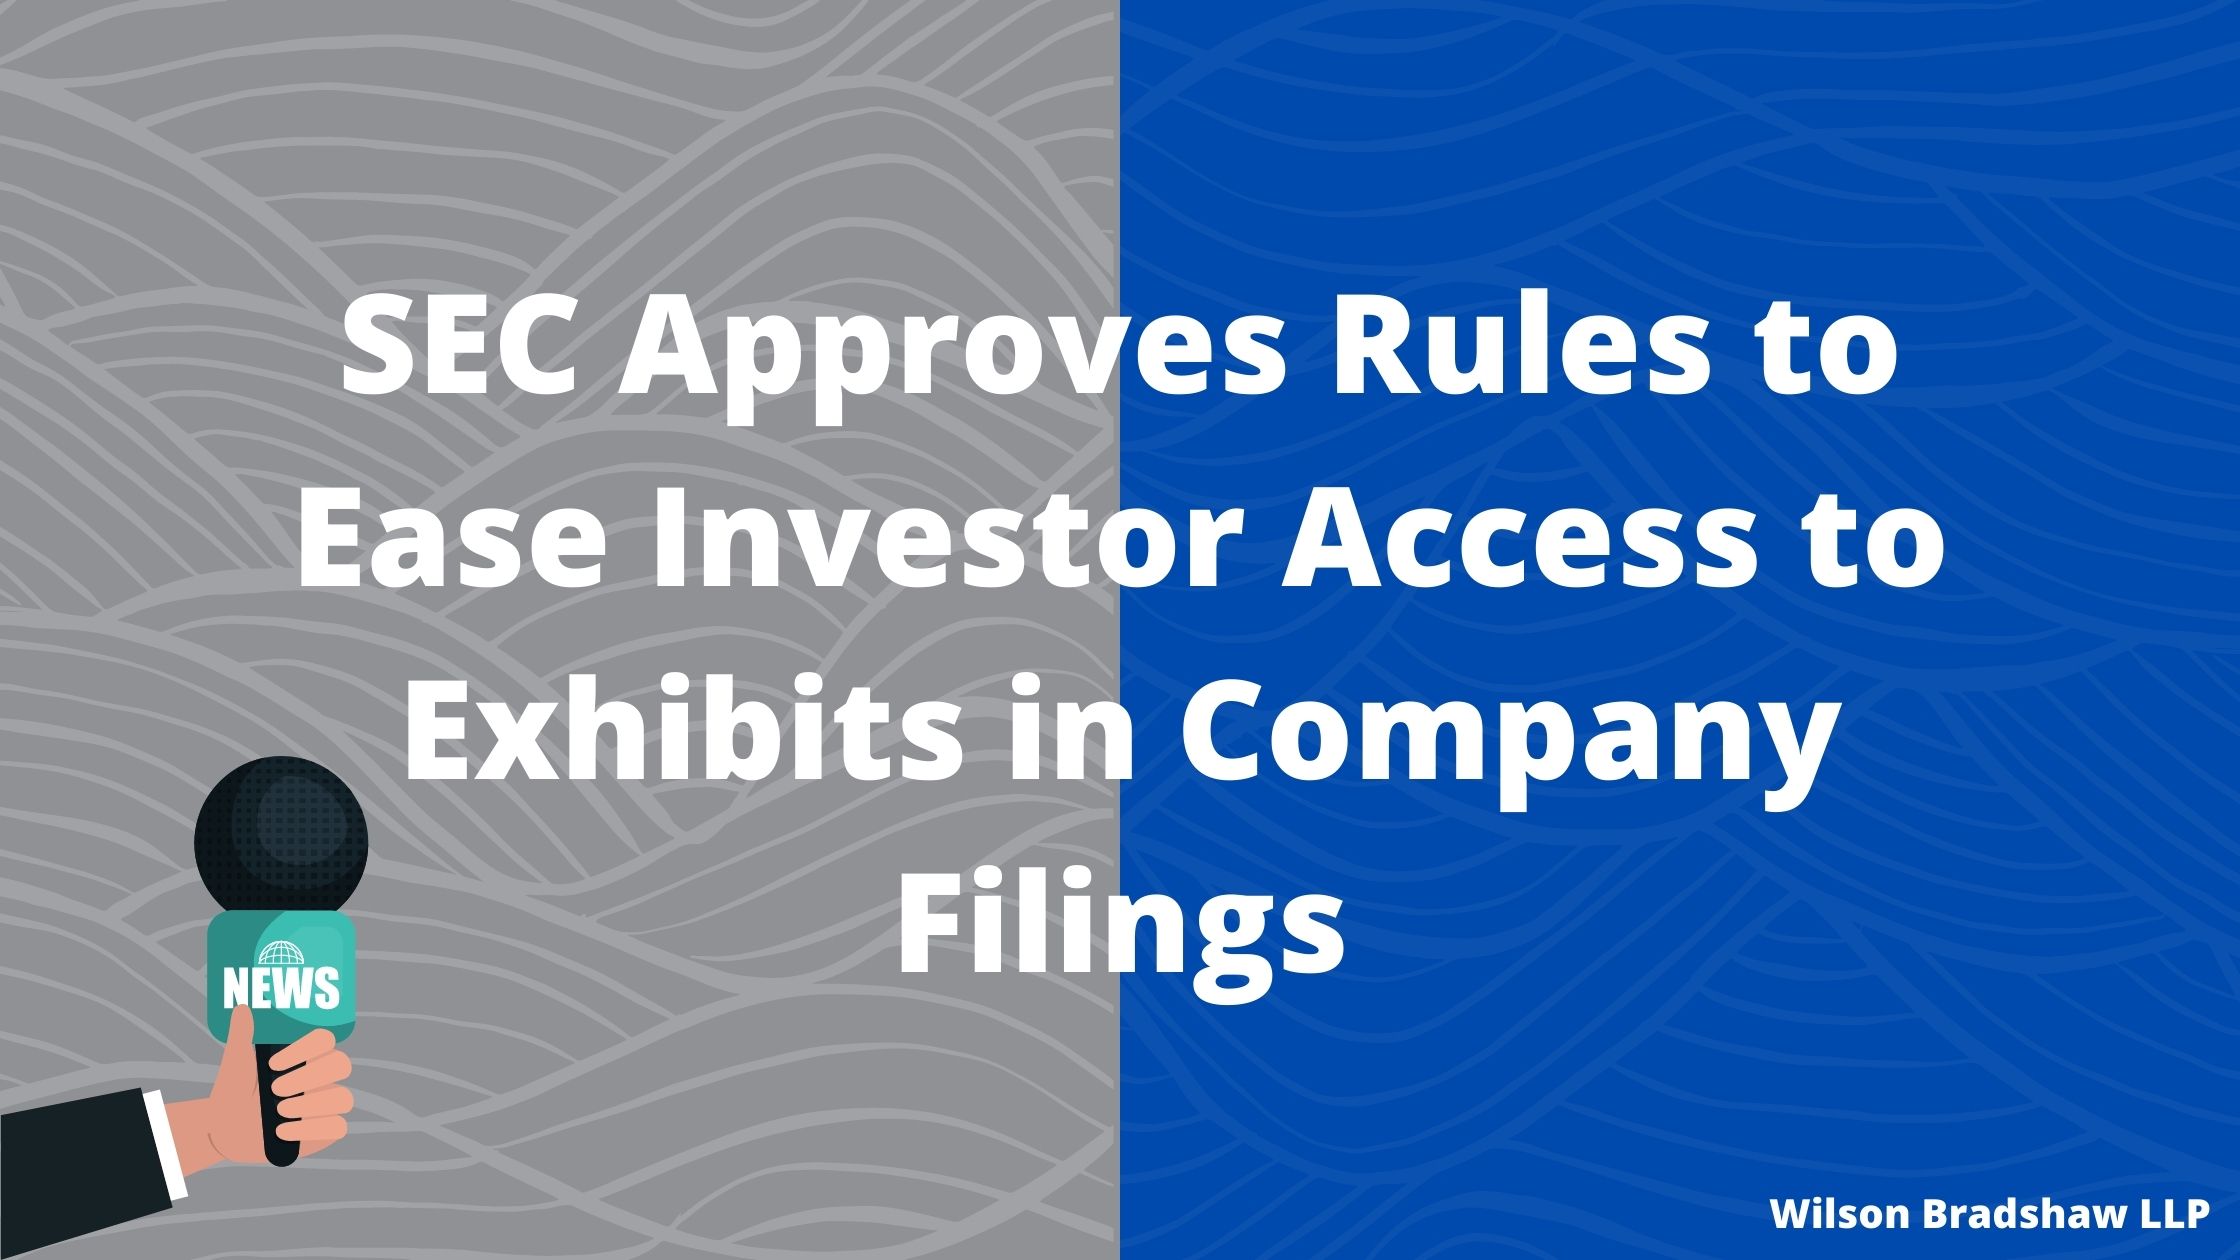 SEC Approves Rules to Ease Investor Access in Company Filings